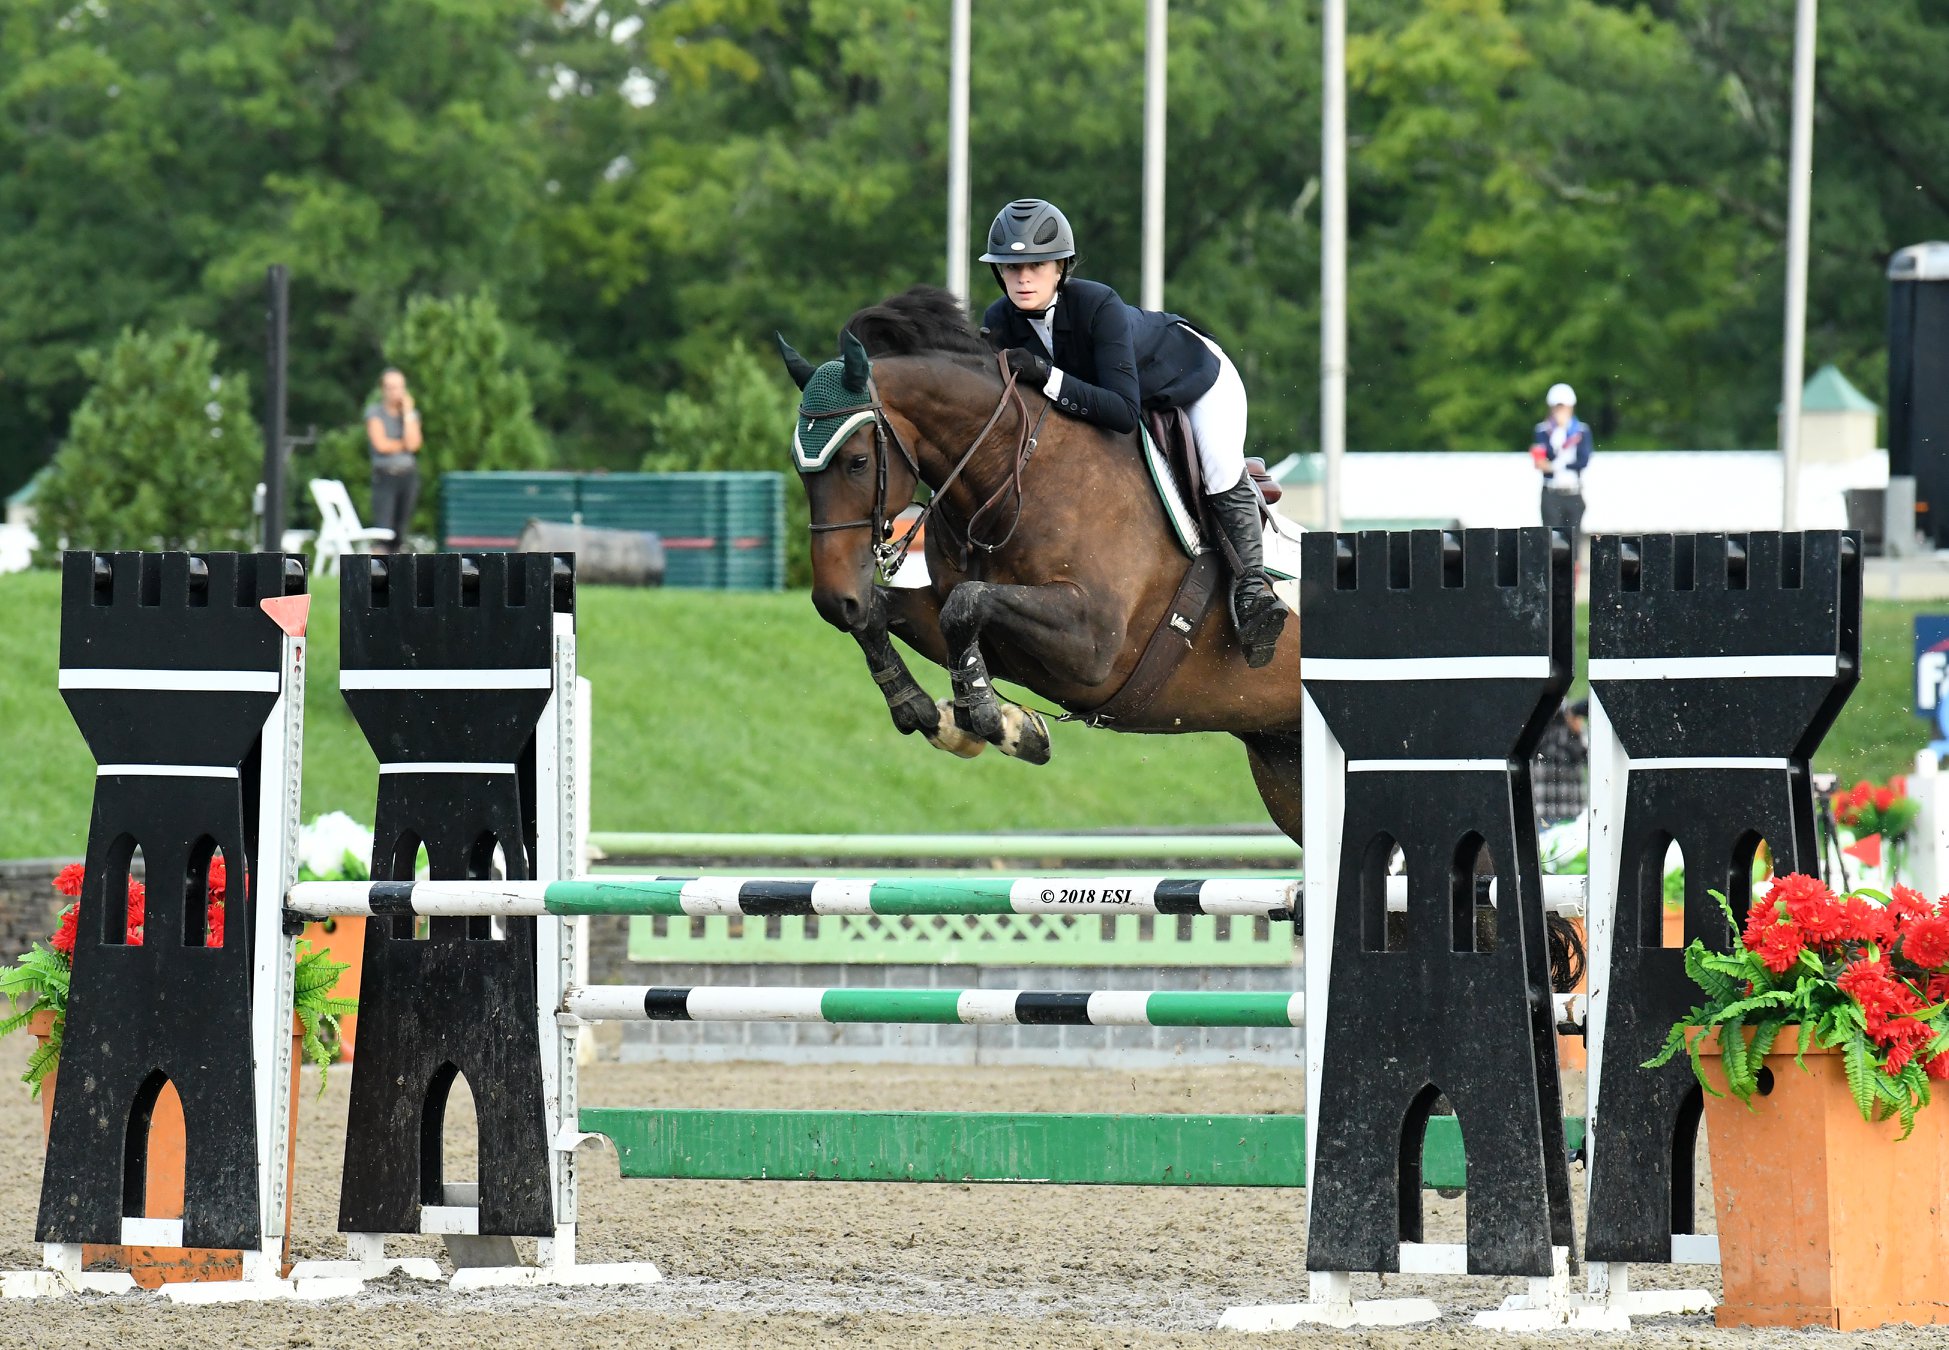 Show jumper jumping over green fence in show ring